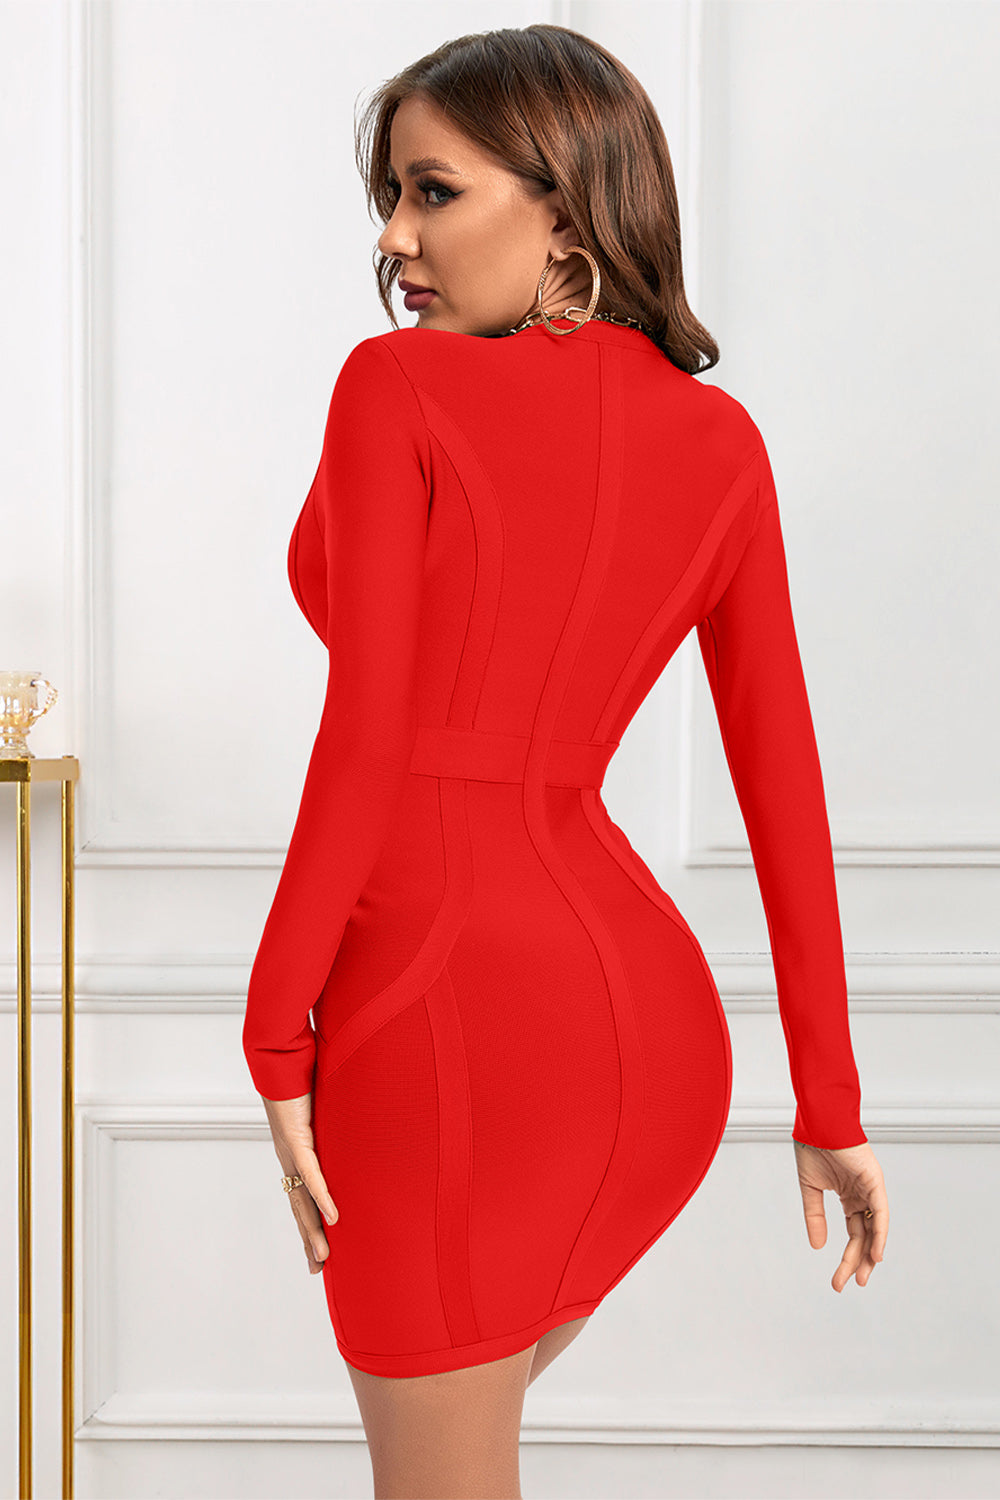 red bandage dress, red bodycon dress, red cocktail dress, bandage dress for women, mini bandage dress, long sleeve bandage dress, event dress, party dress, v neck bandage dress, stripe bandage dress